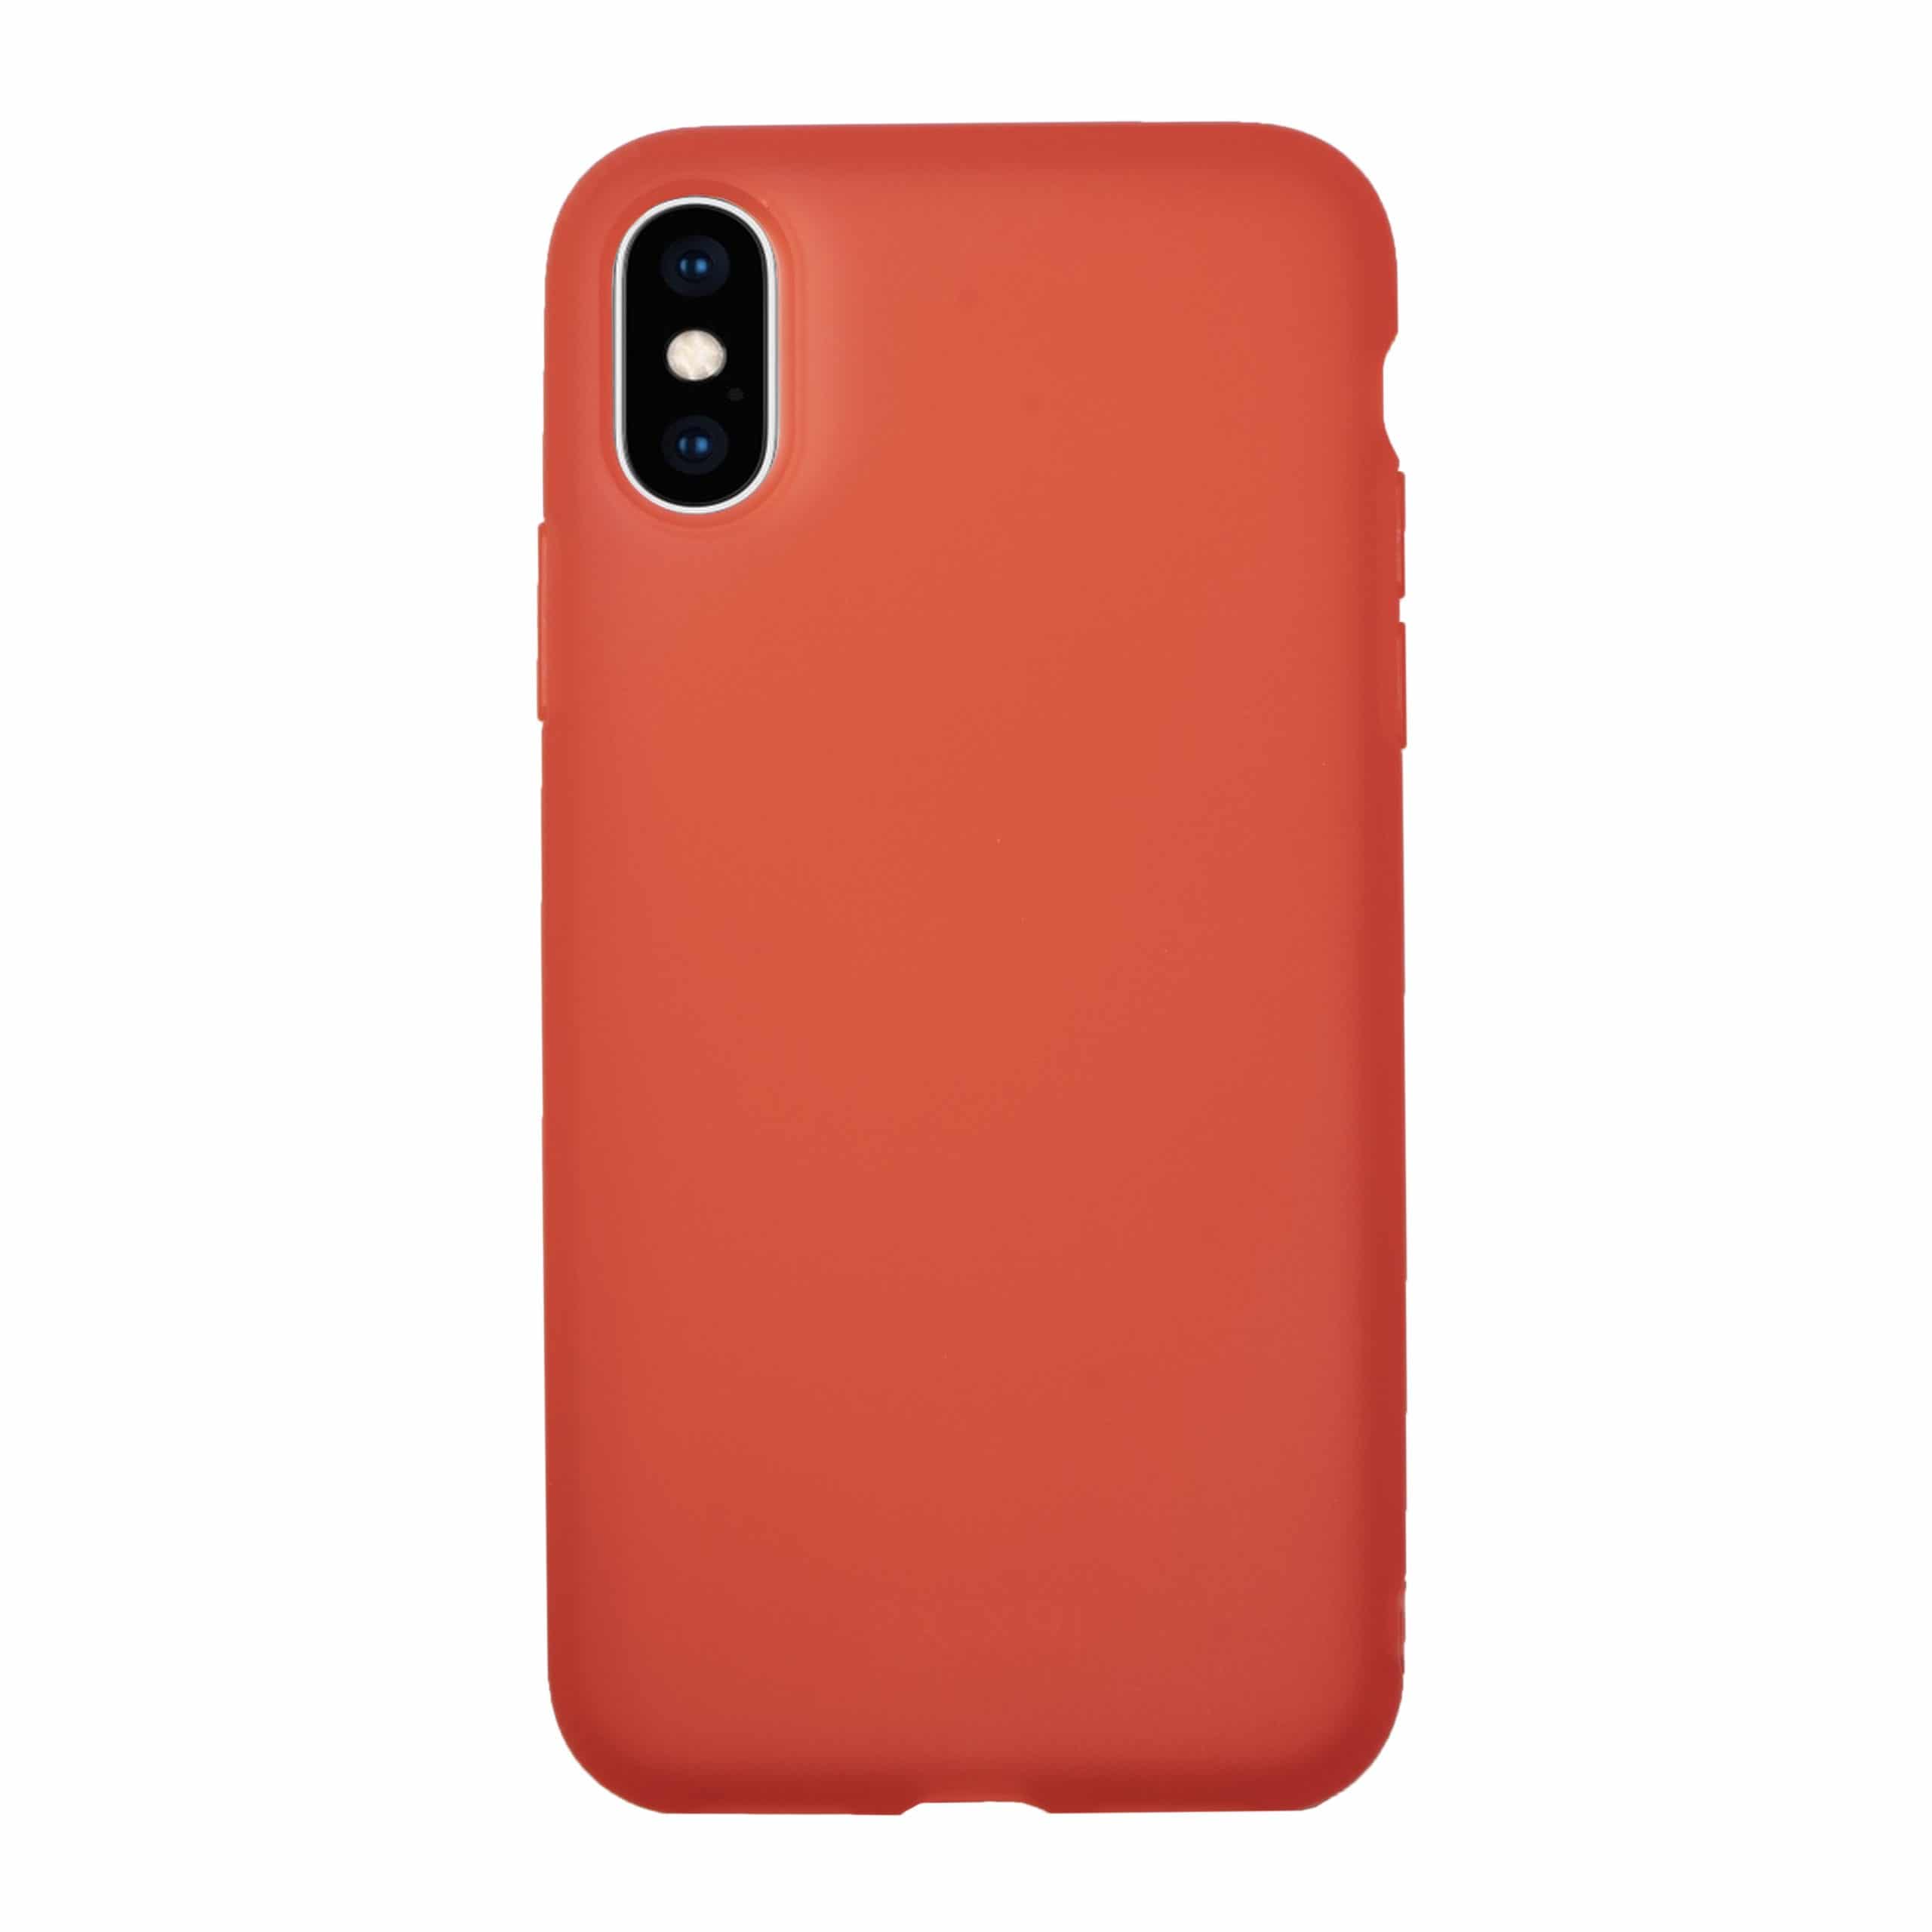 iPhone X/Xs rood soft case hoesje